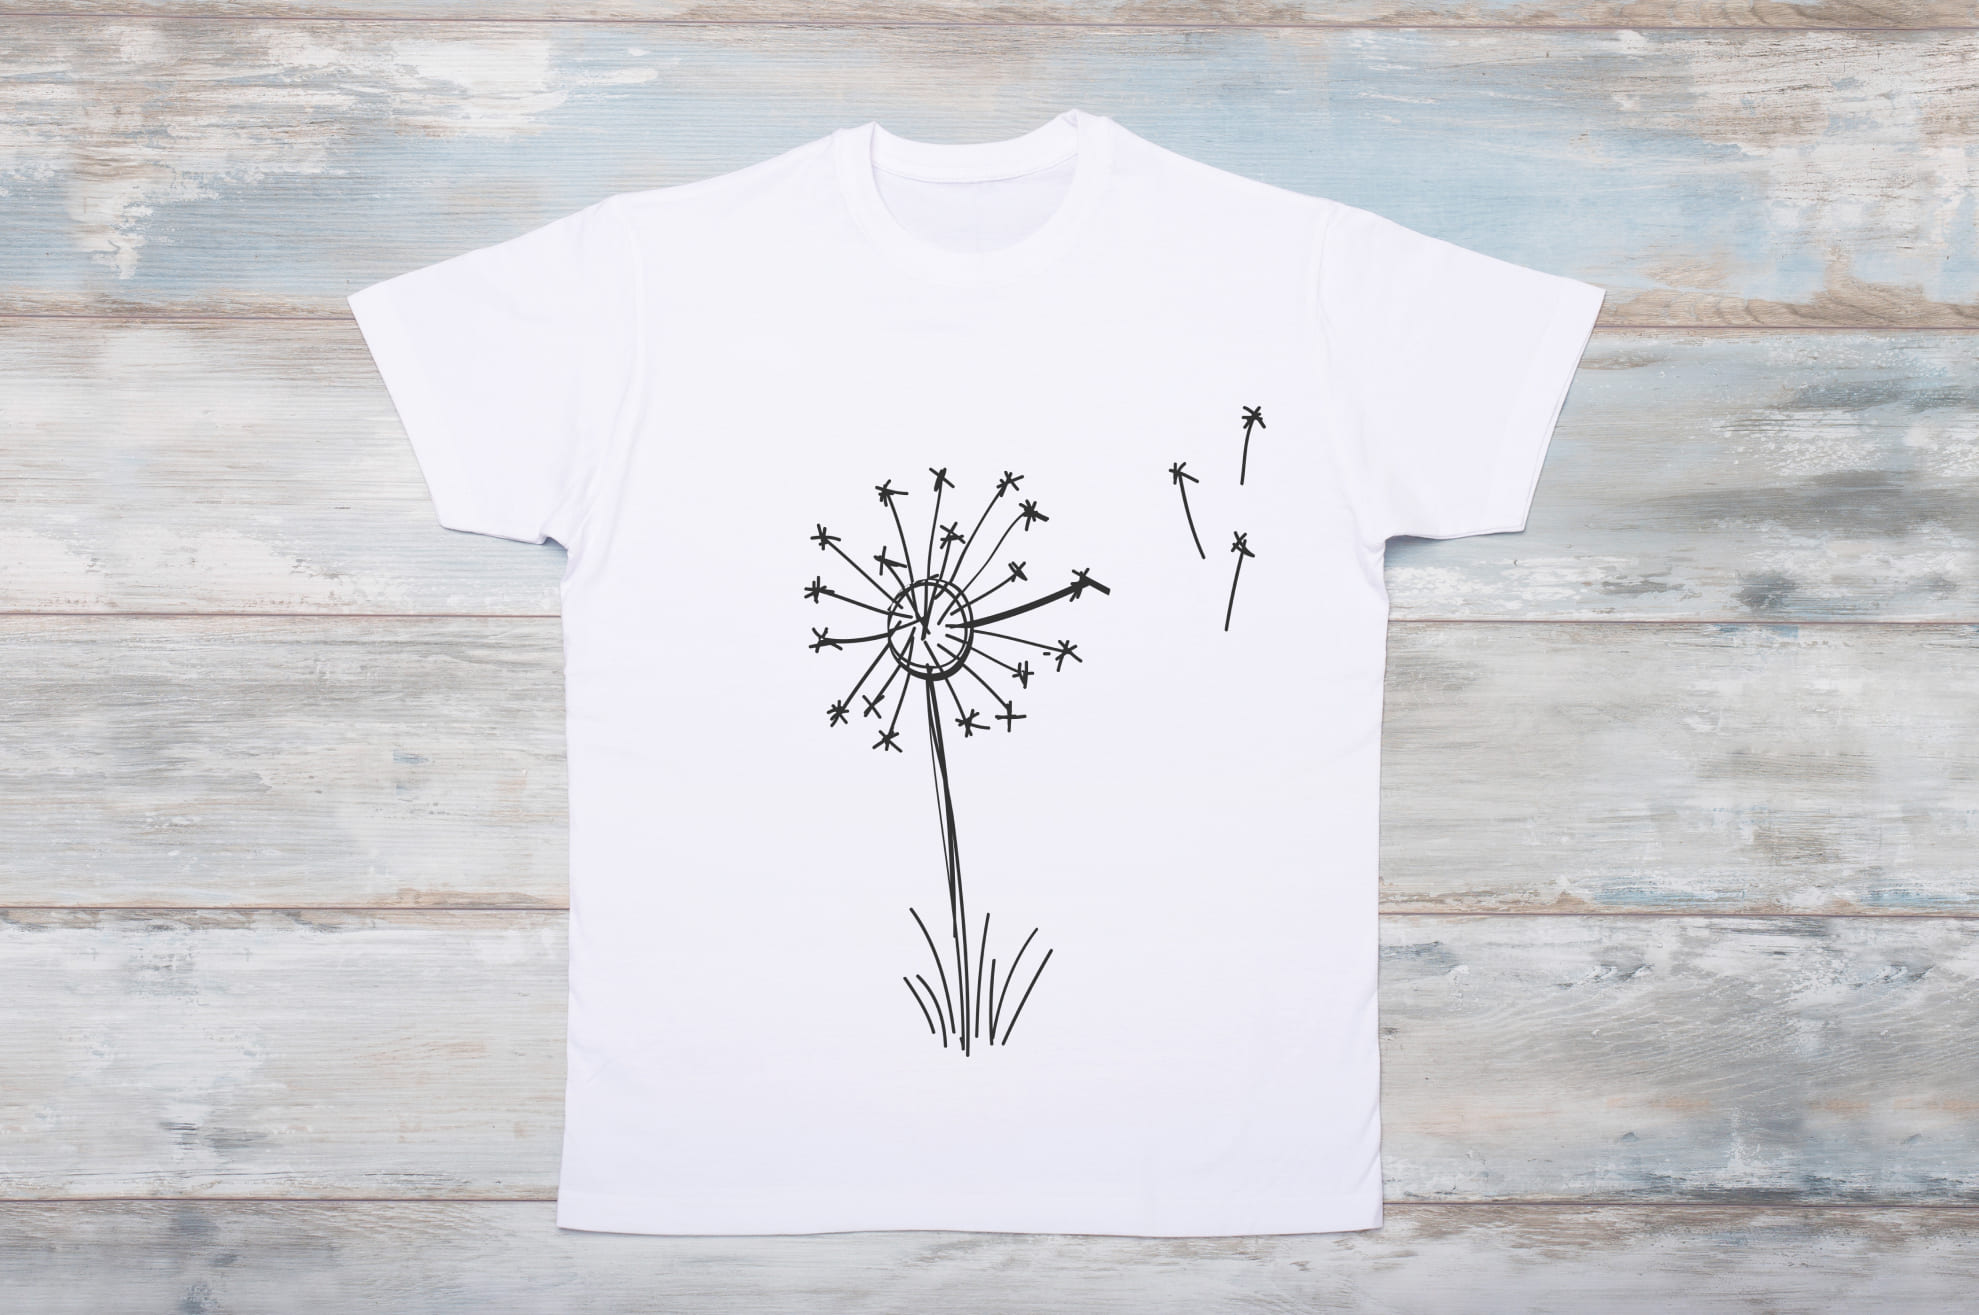 T-shirt image with exquisite dandelion print.